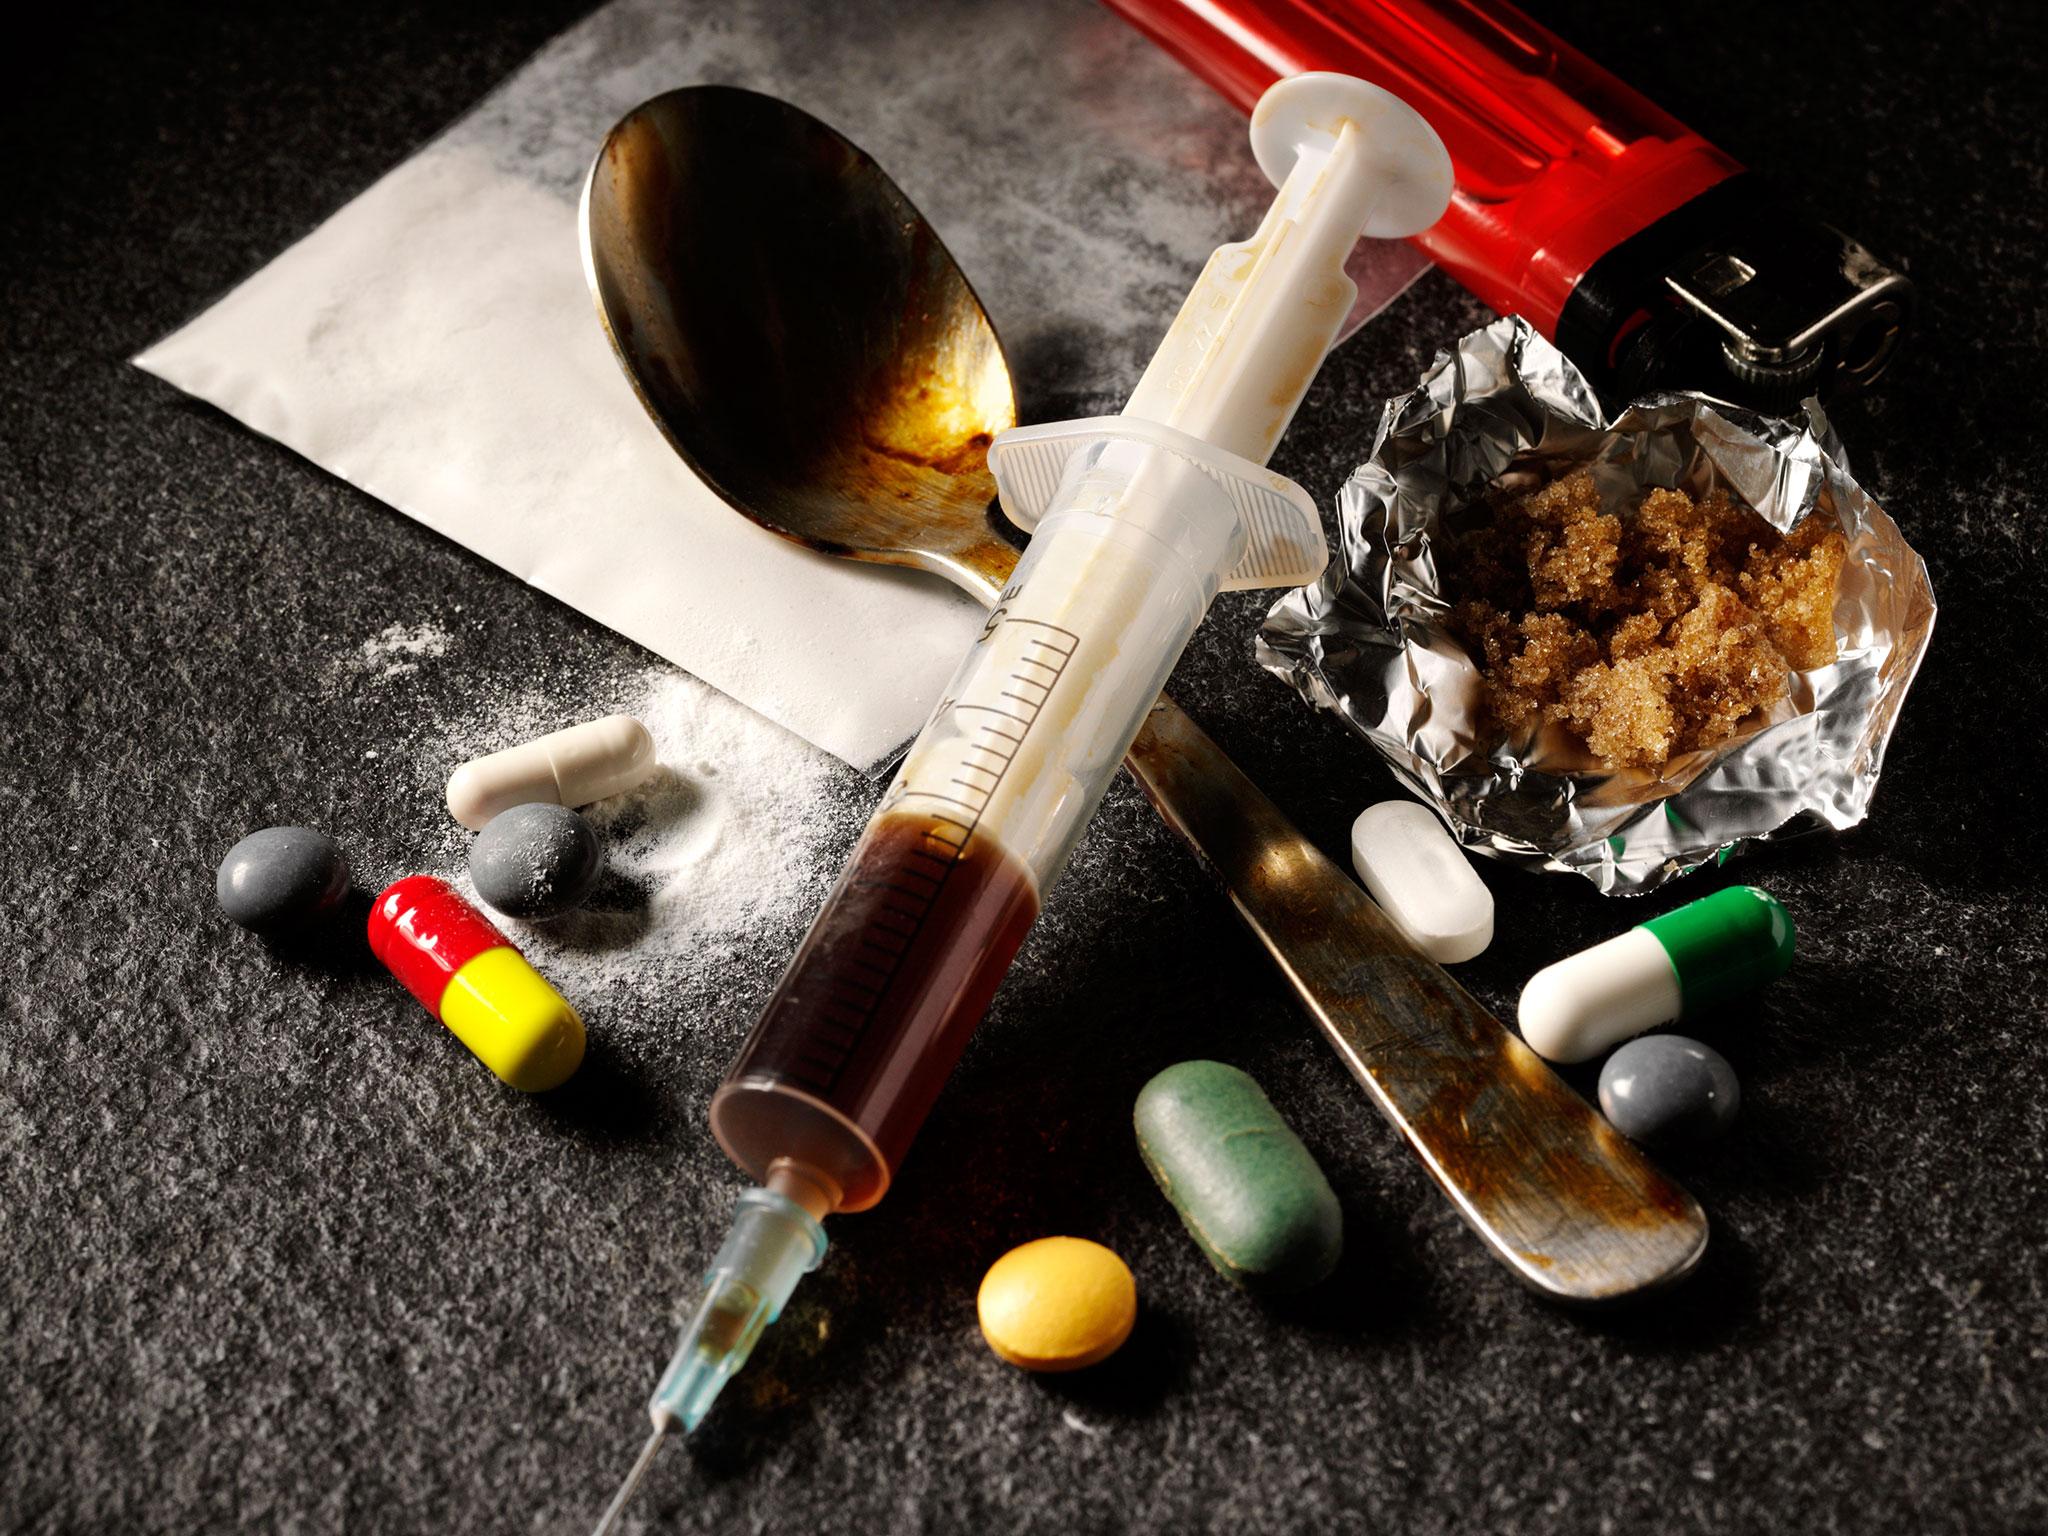 Drug Dealers in Kelantan Are Luring Children As Young As 9 Years Old to Be Addicts - WORLD OF BUZZ